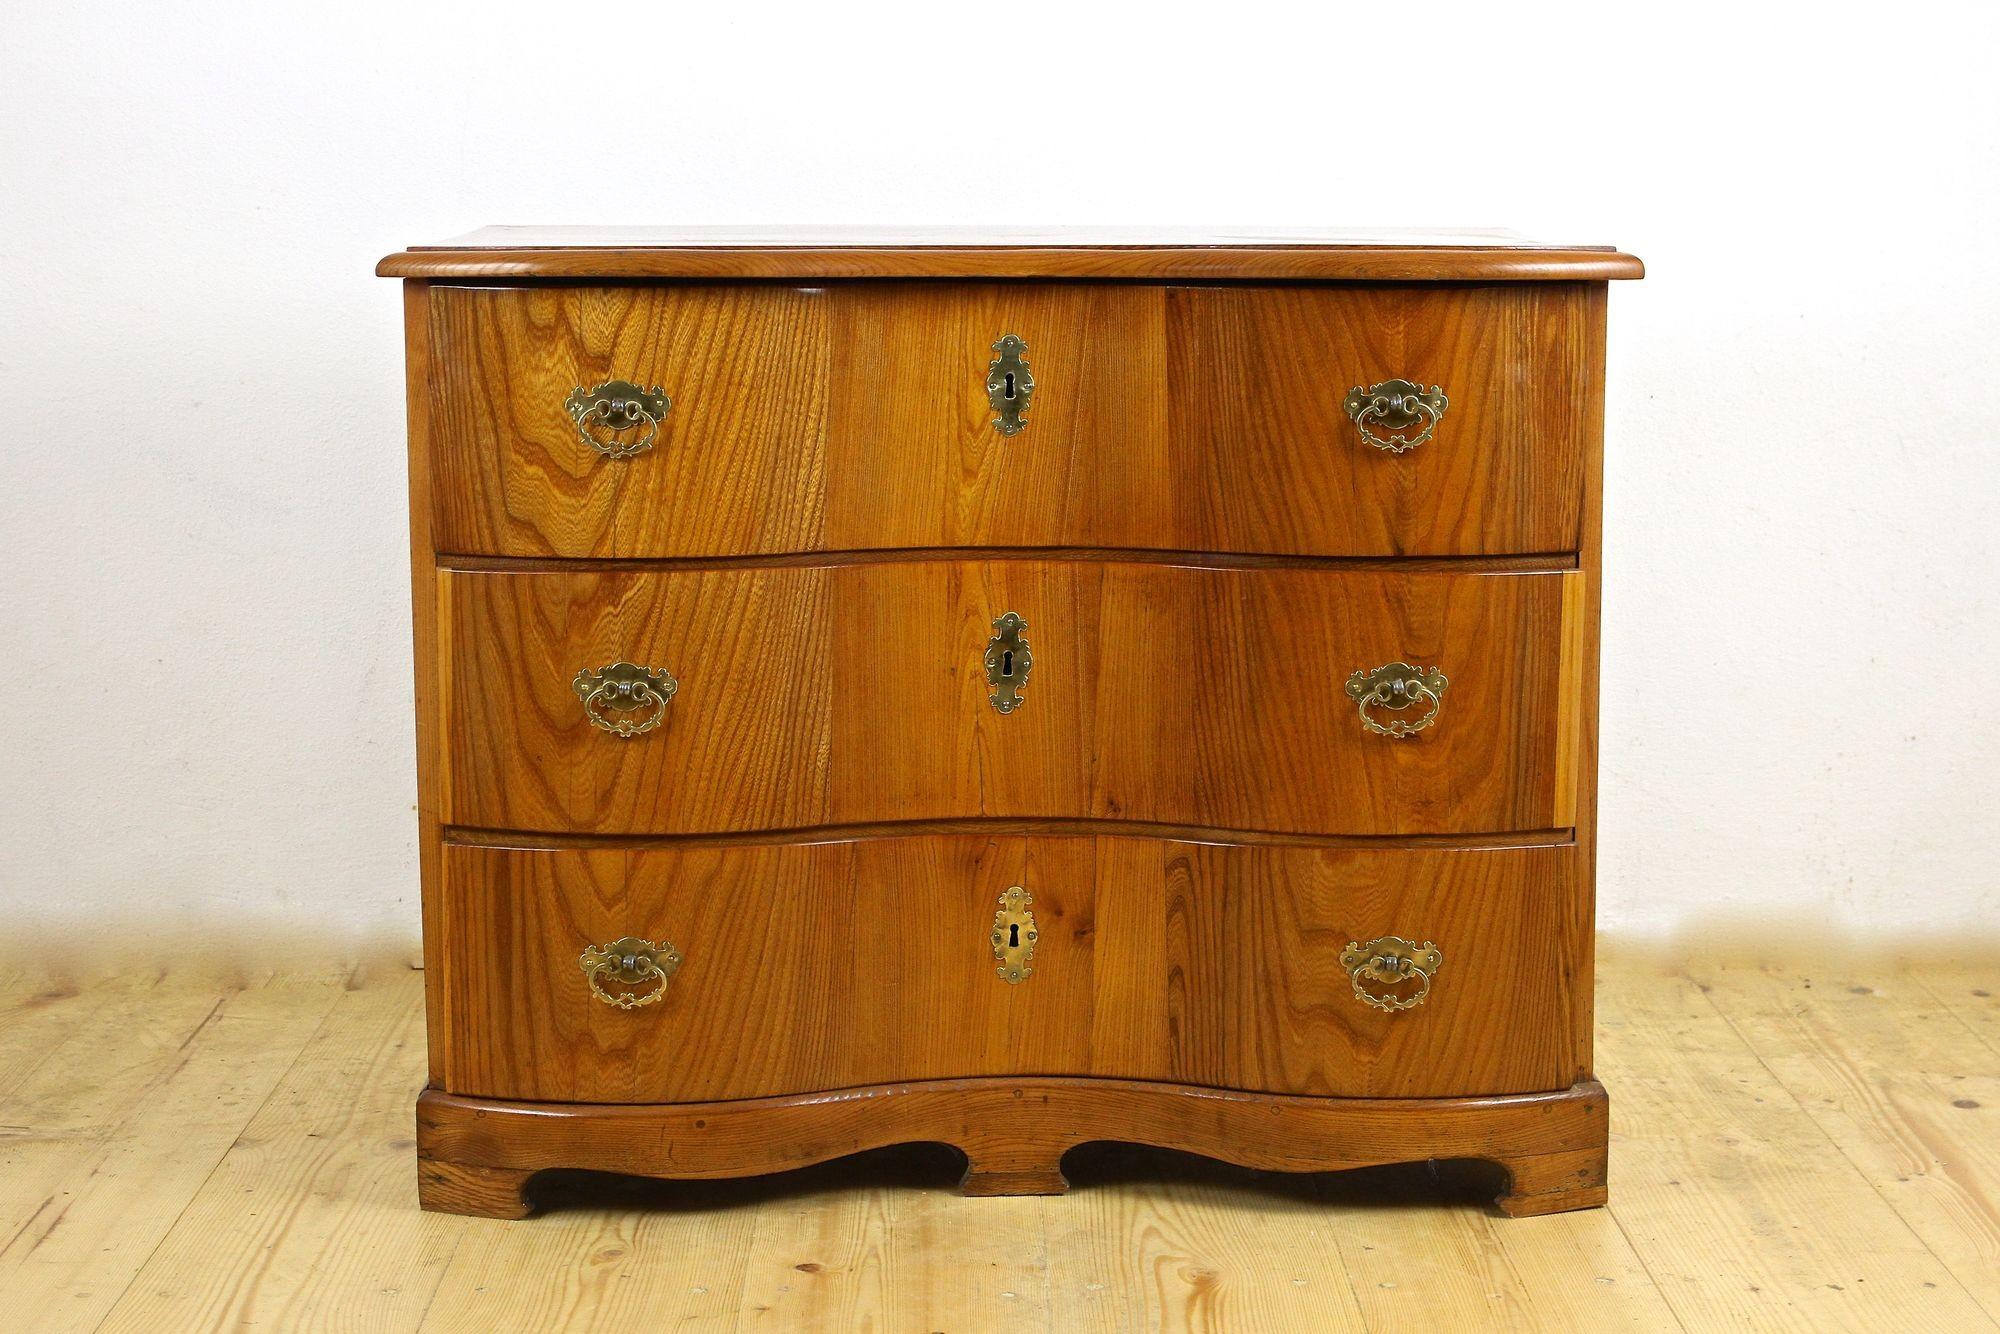 Extraordinary 18th century Baroque chest of drawers made in the period around 1770 in South Germany. What is really special about this over 240 year old Baroque commode, is the very rare cubature as well as the uncommon used, beautiful elm wood